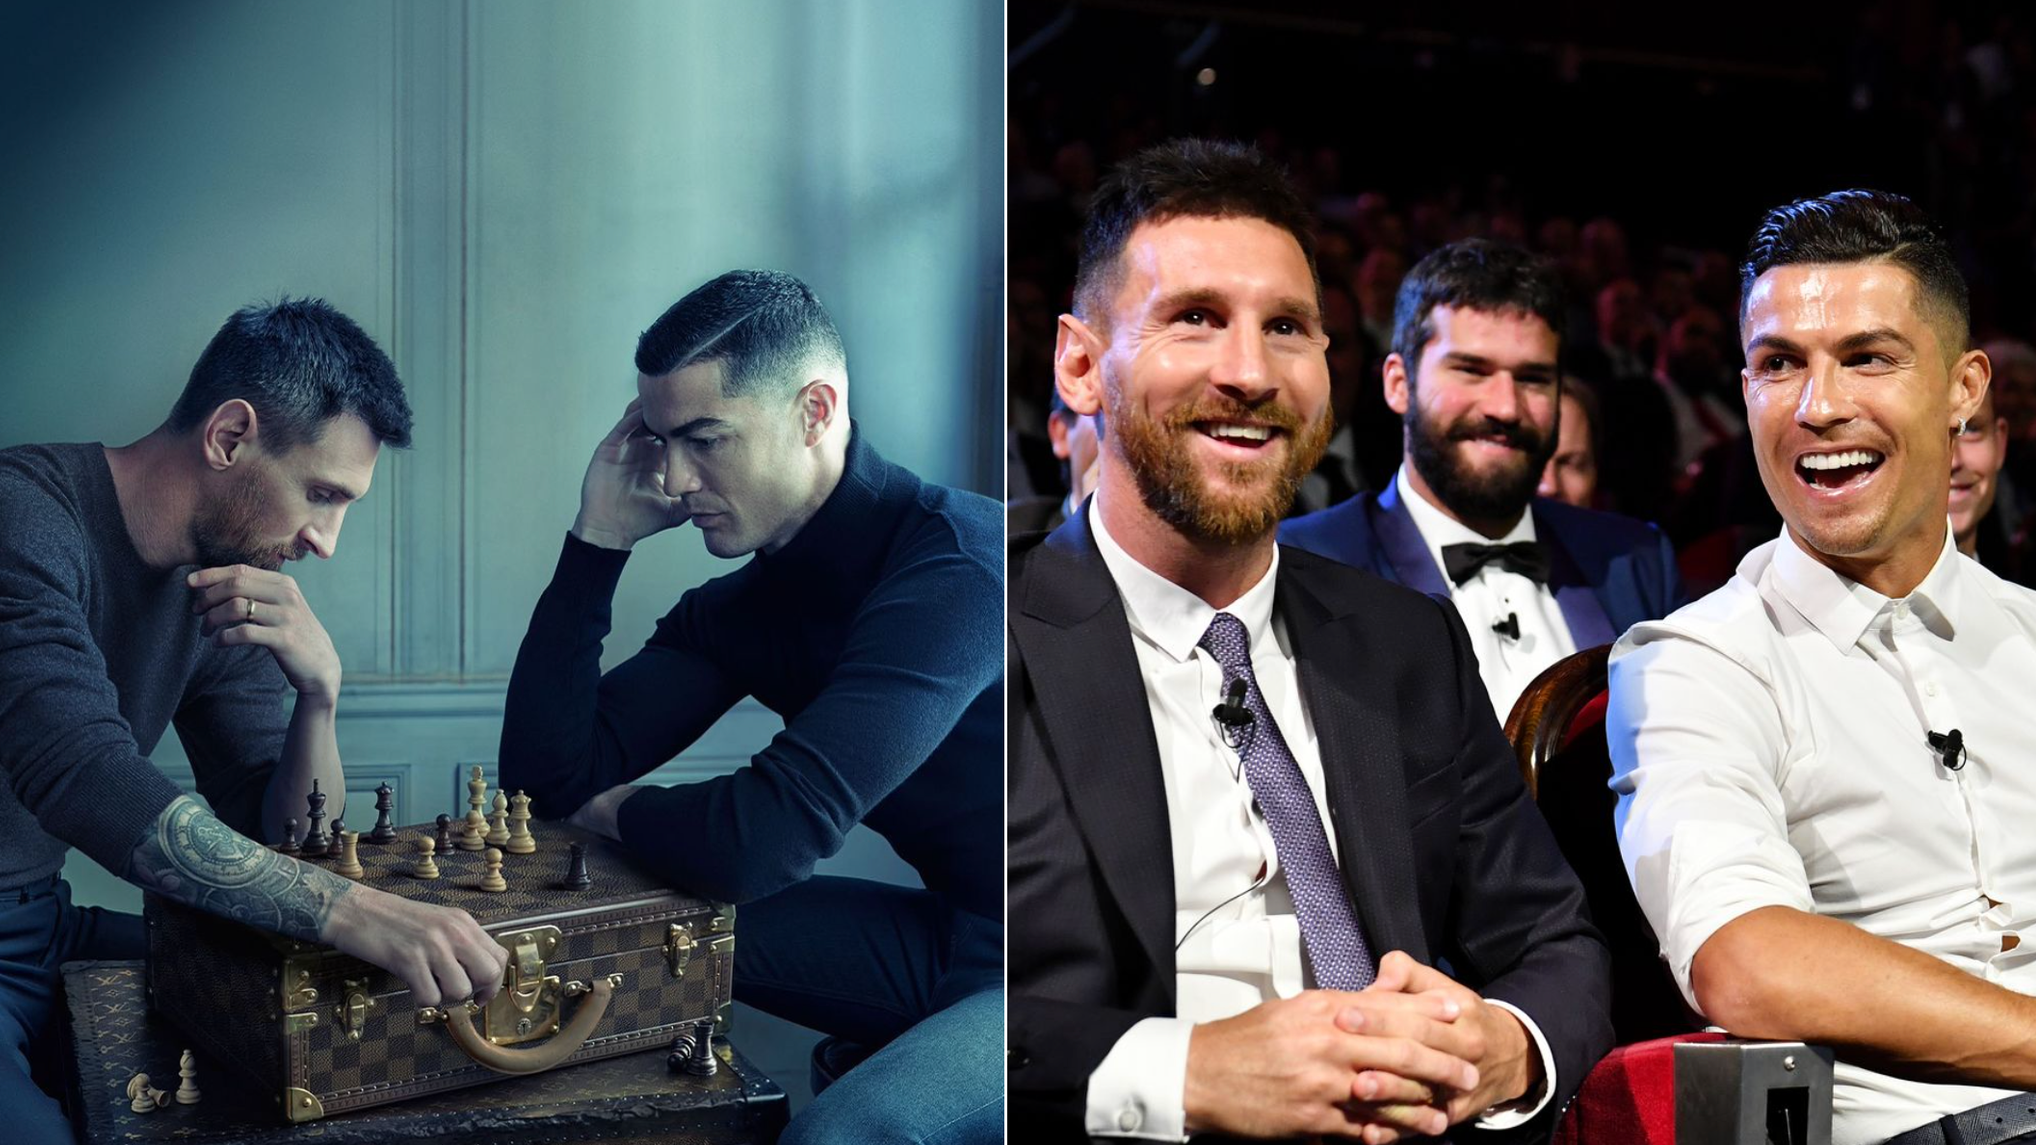 Lionel Messi and Cristiano Ronaldo have just broken the internet with  'picture of the century'